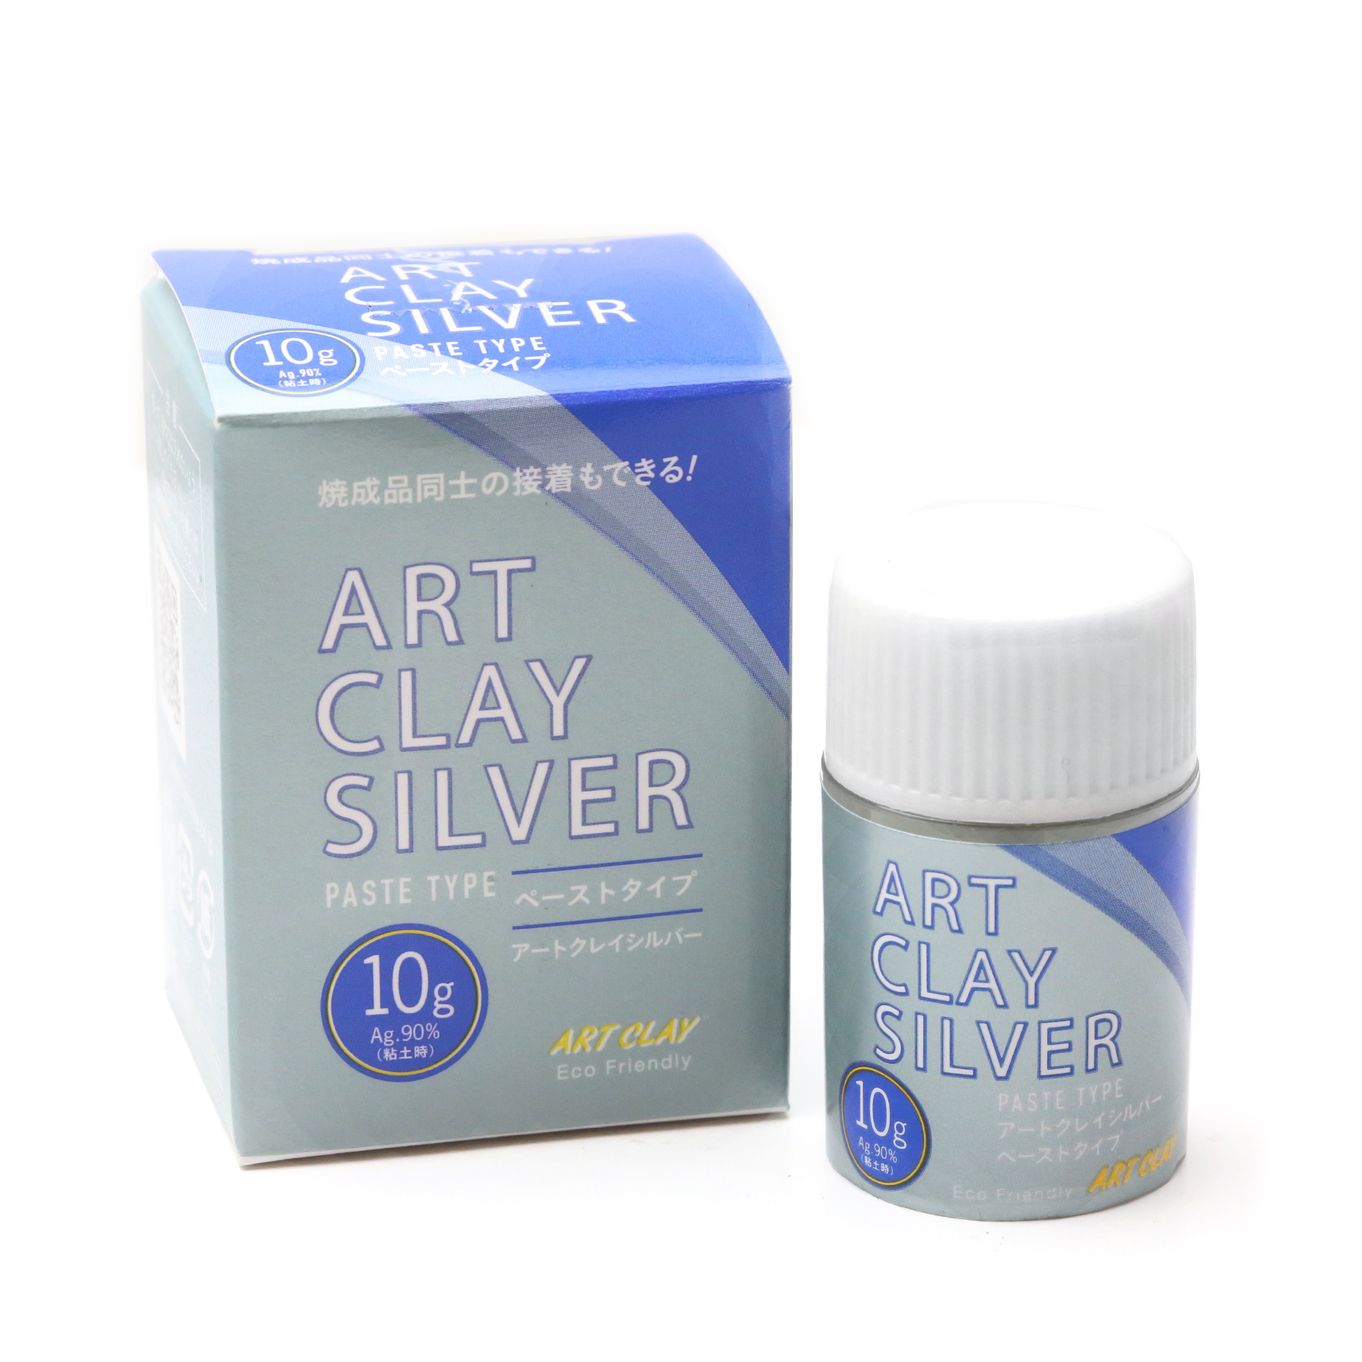 Art Clay Silver - 100% recycled eco-silver